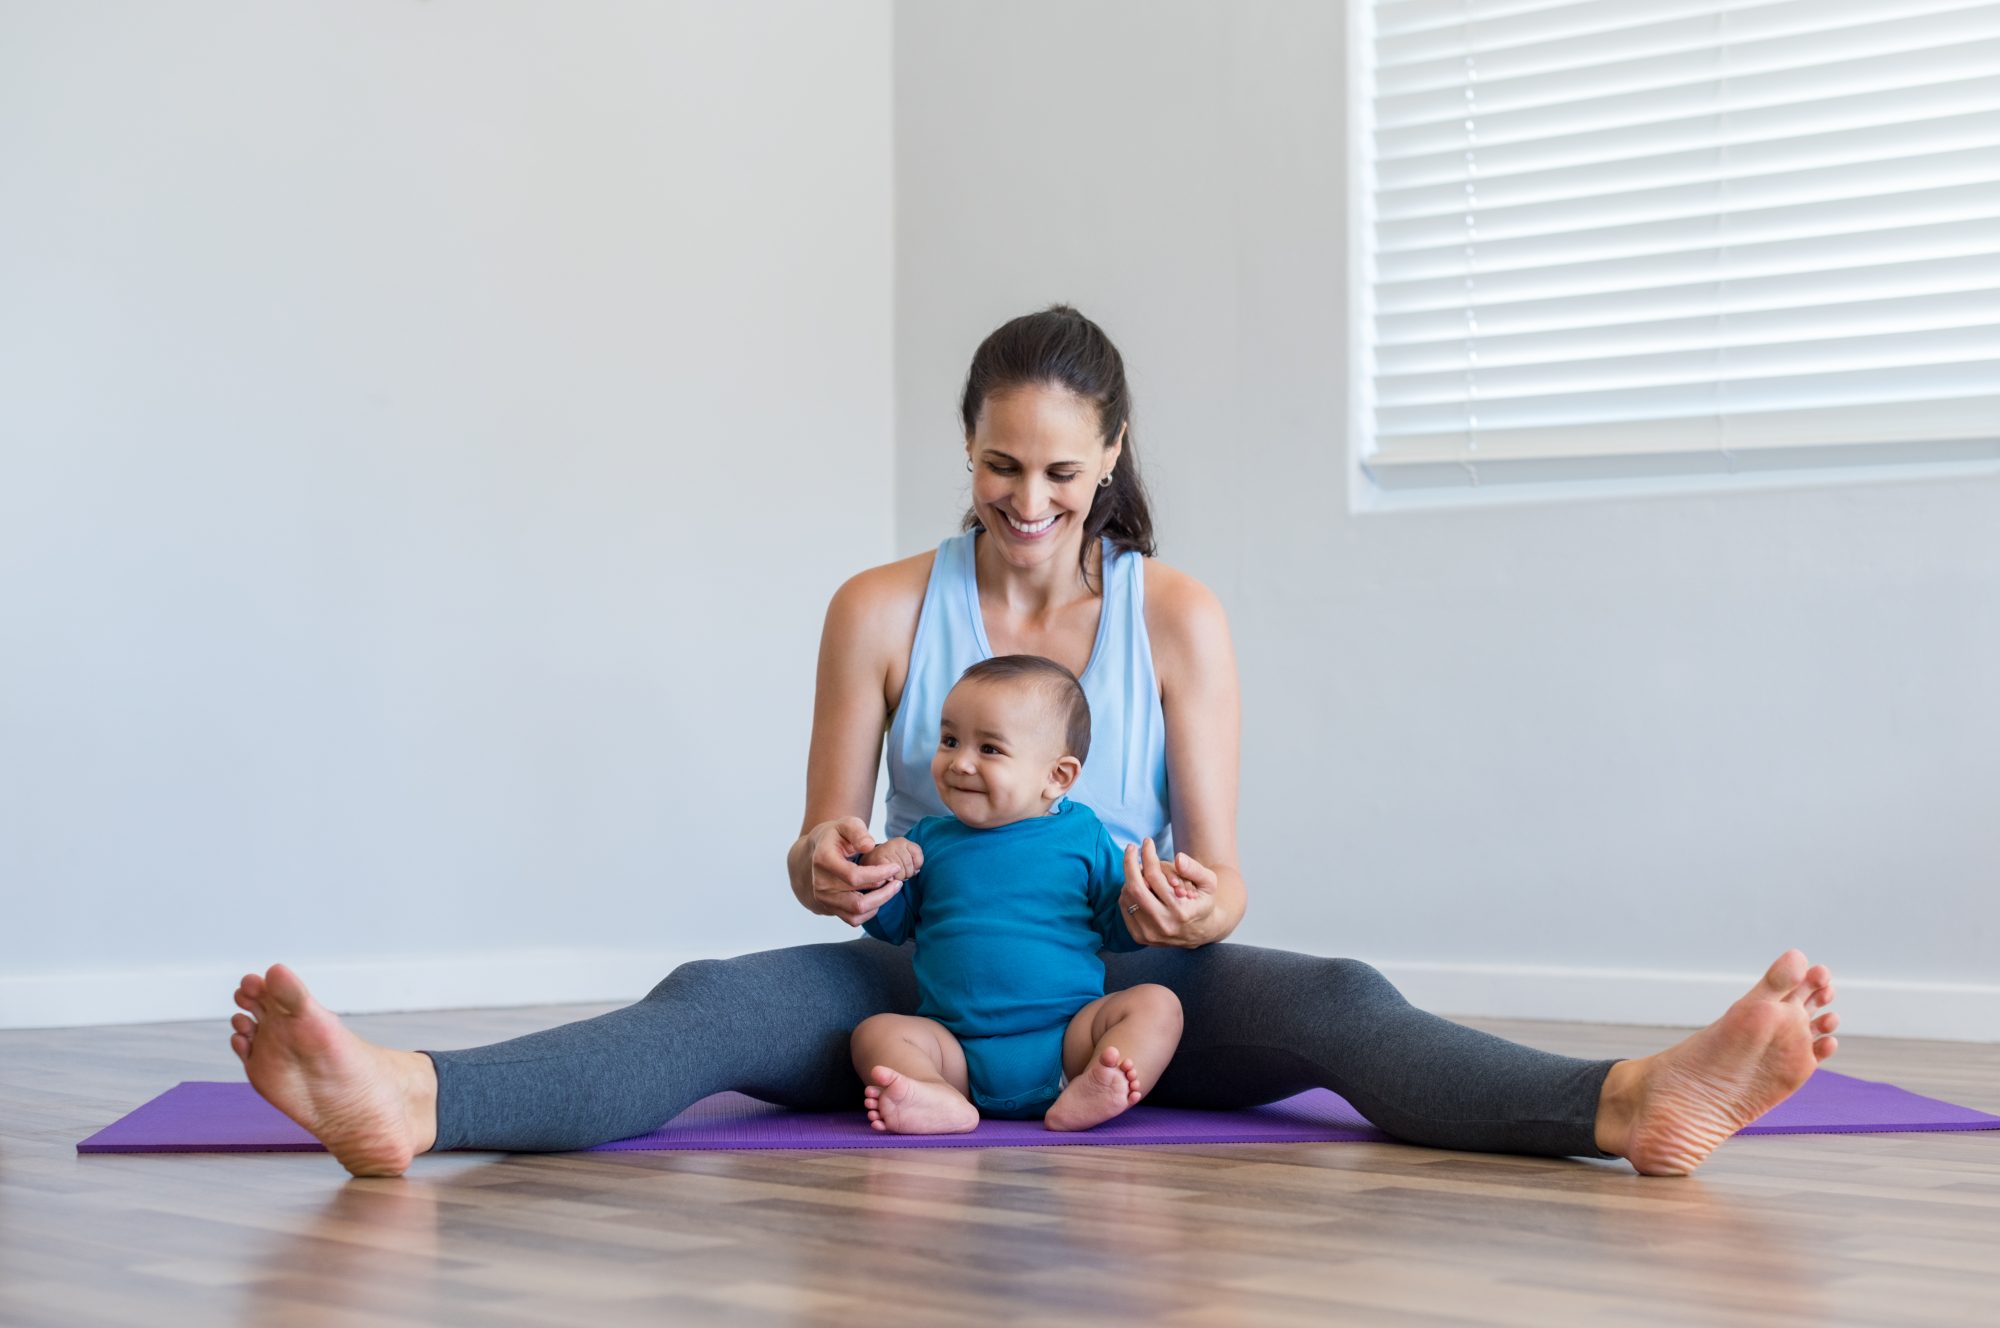 Getting enough exercise is crucial to the health of new moms